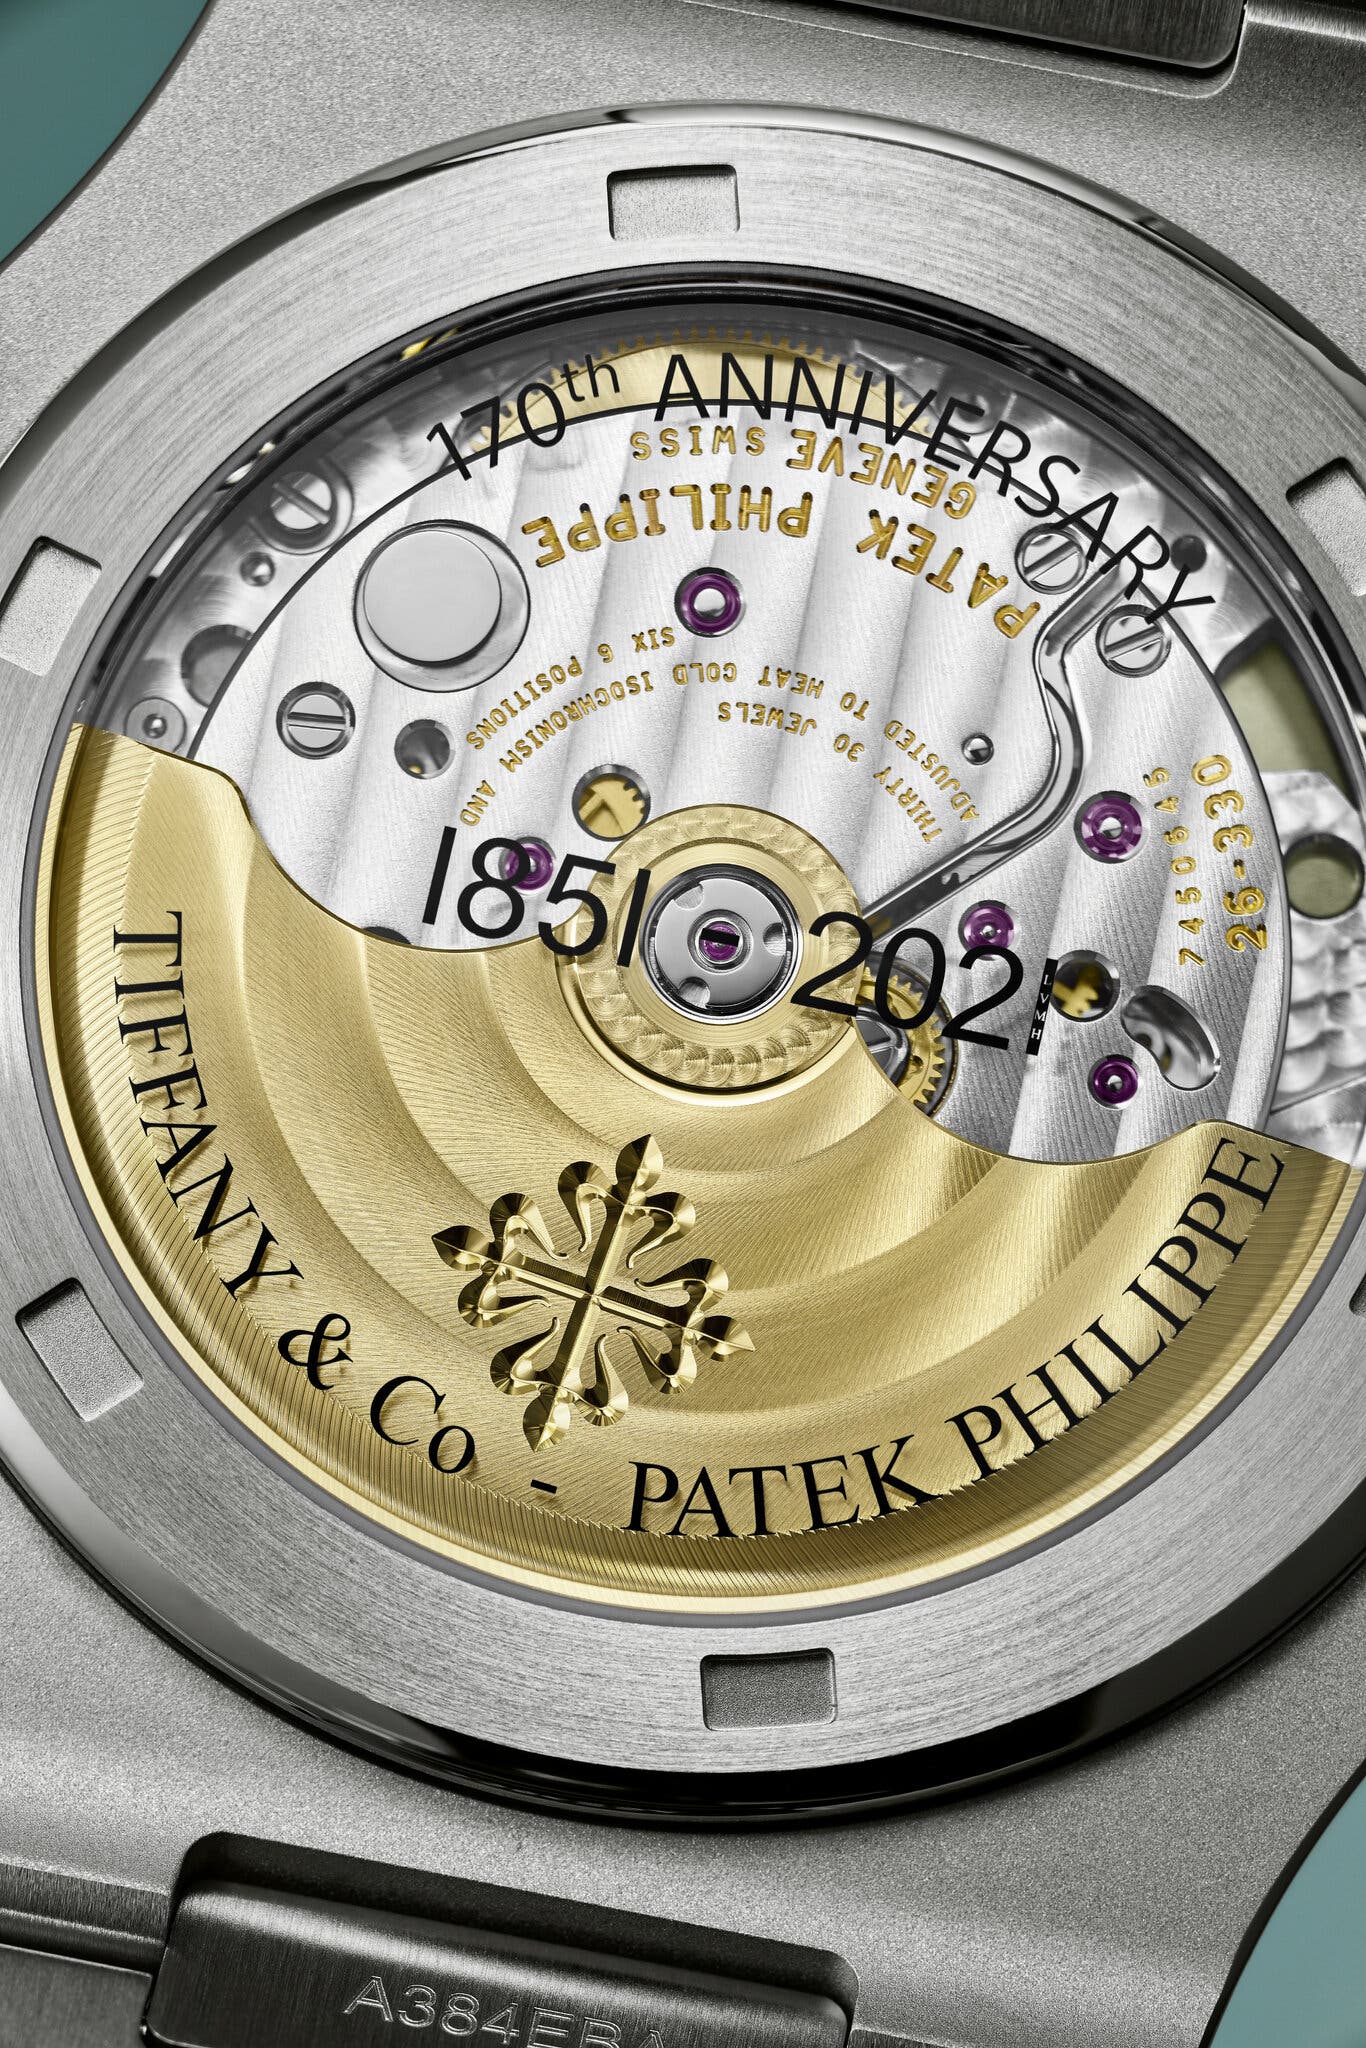 Phillips Breaks Records with the First Patek Philippe Nautilus